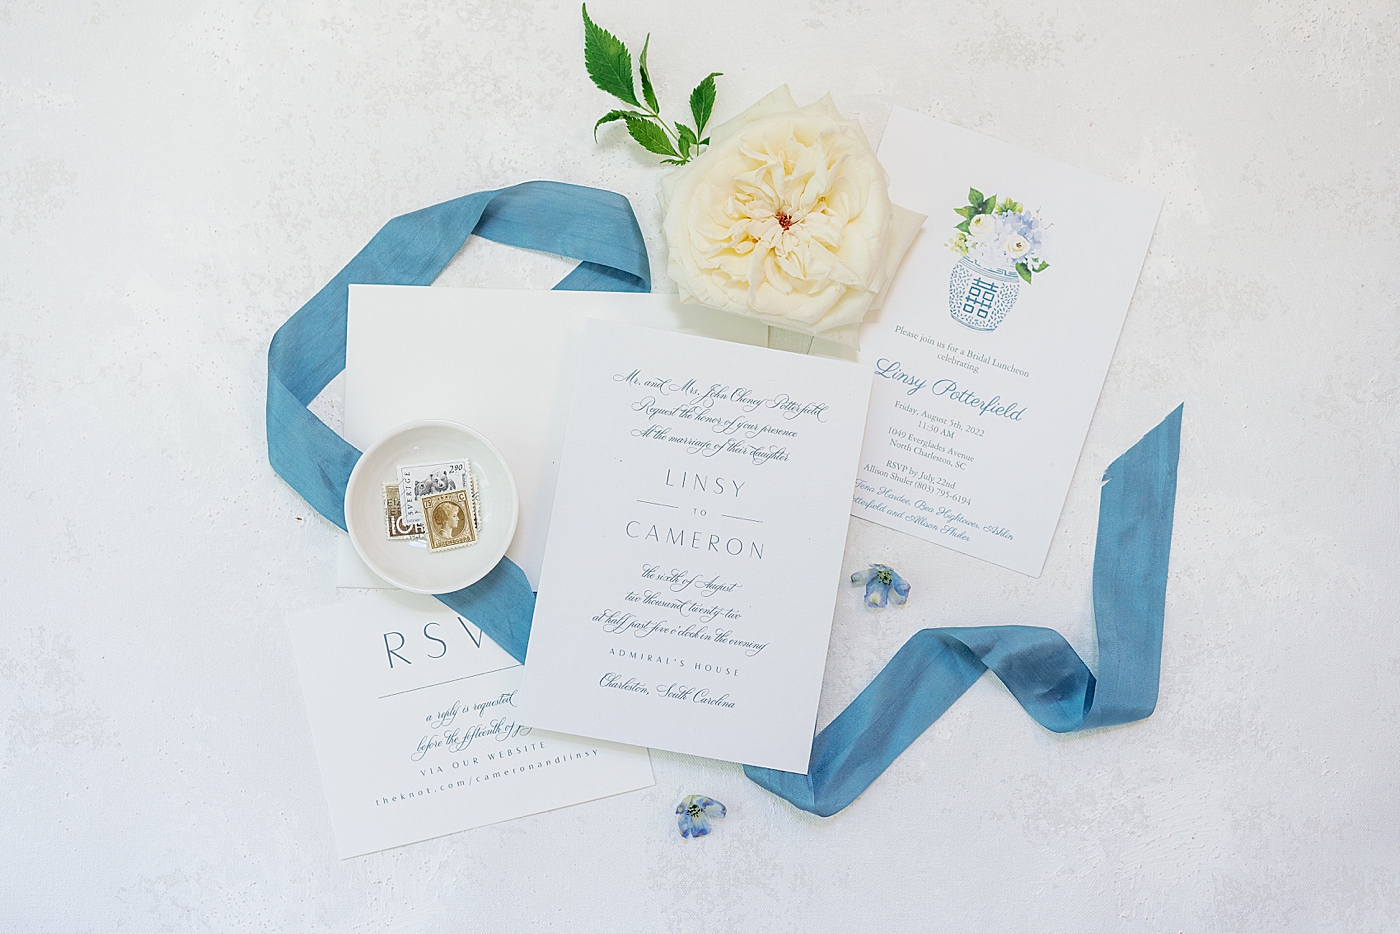 Wedding invitation suite with blue ribbon and white flowers | Images by Annie Laura Photography